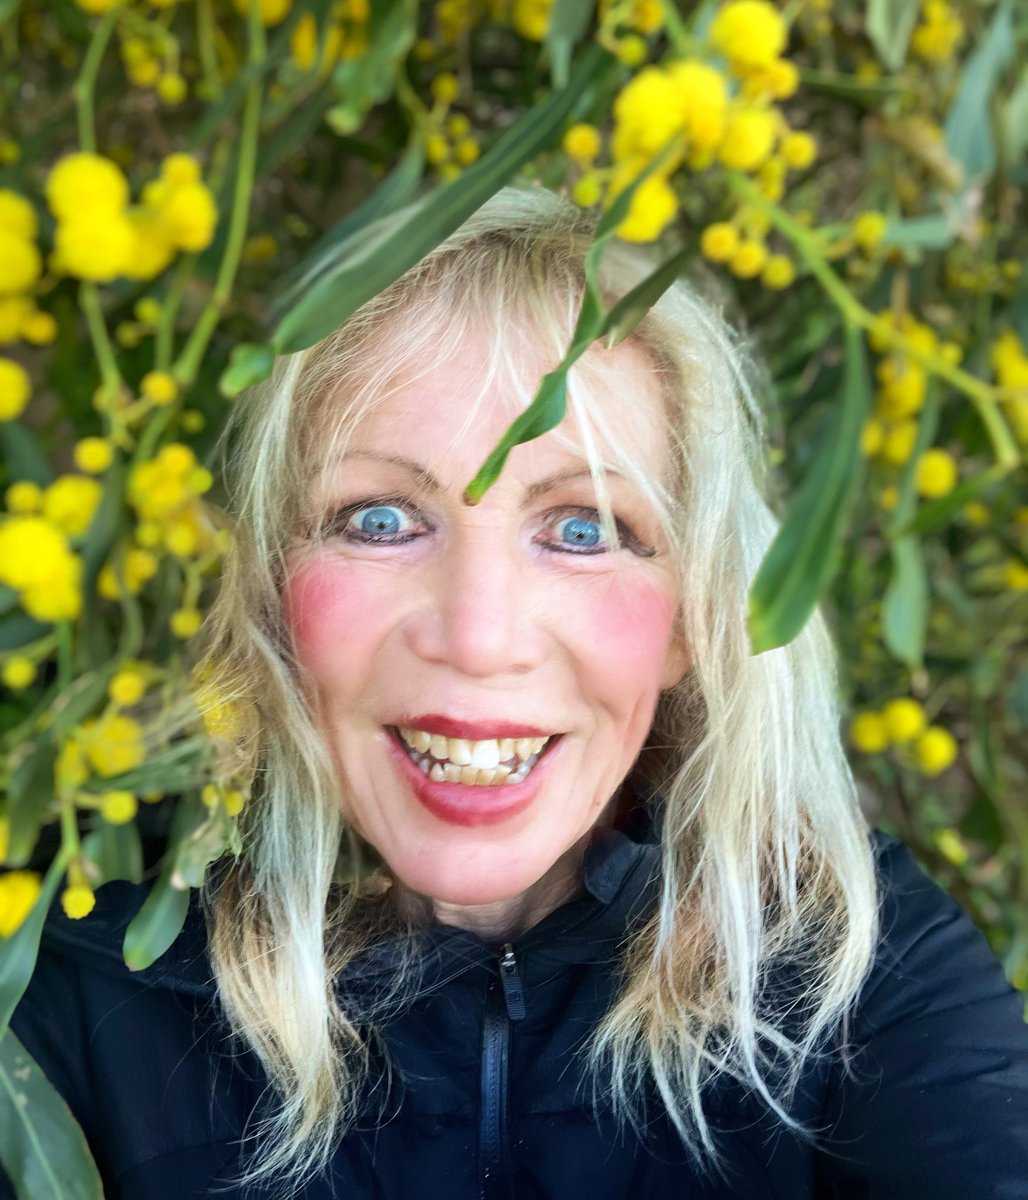 Happy Monday my friends! Lots of fluffy yellow flowers of the golden wattle/Acacia pycnantha by the beach! Great run in the sun and even the stairs felt amazing! Sparkly swim in 59f water! #running #runningpunks #monday #California